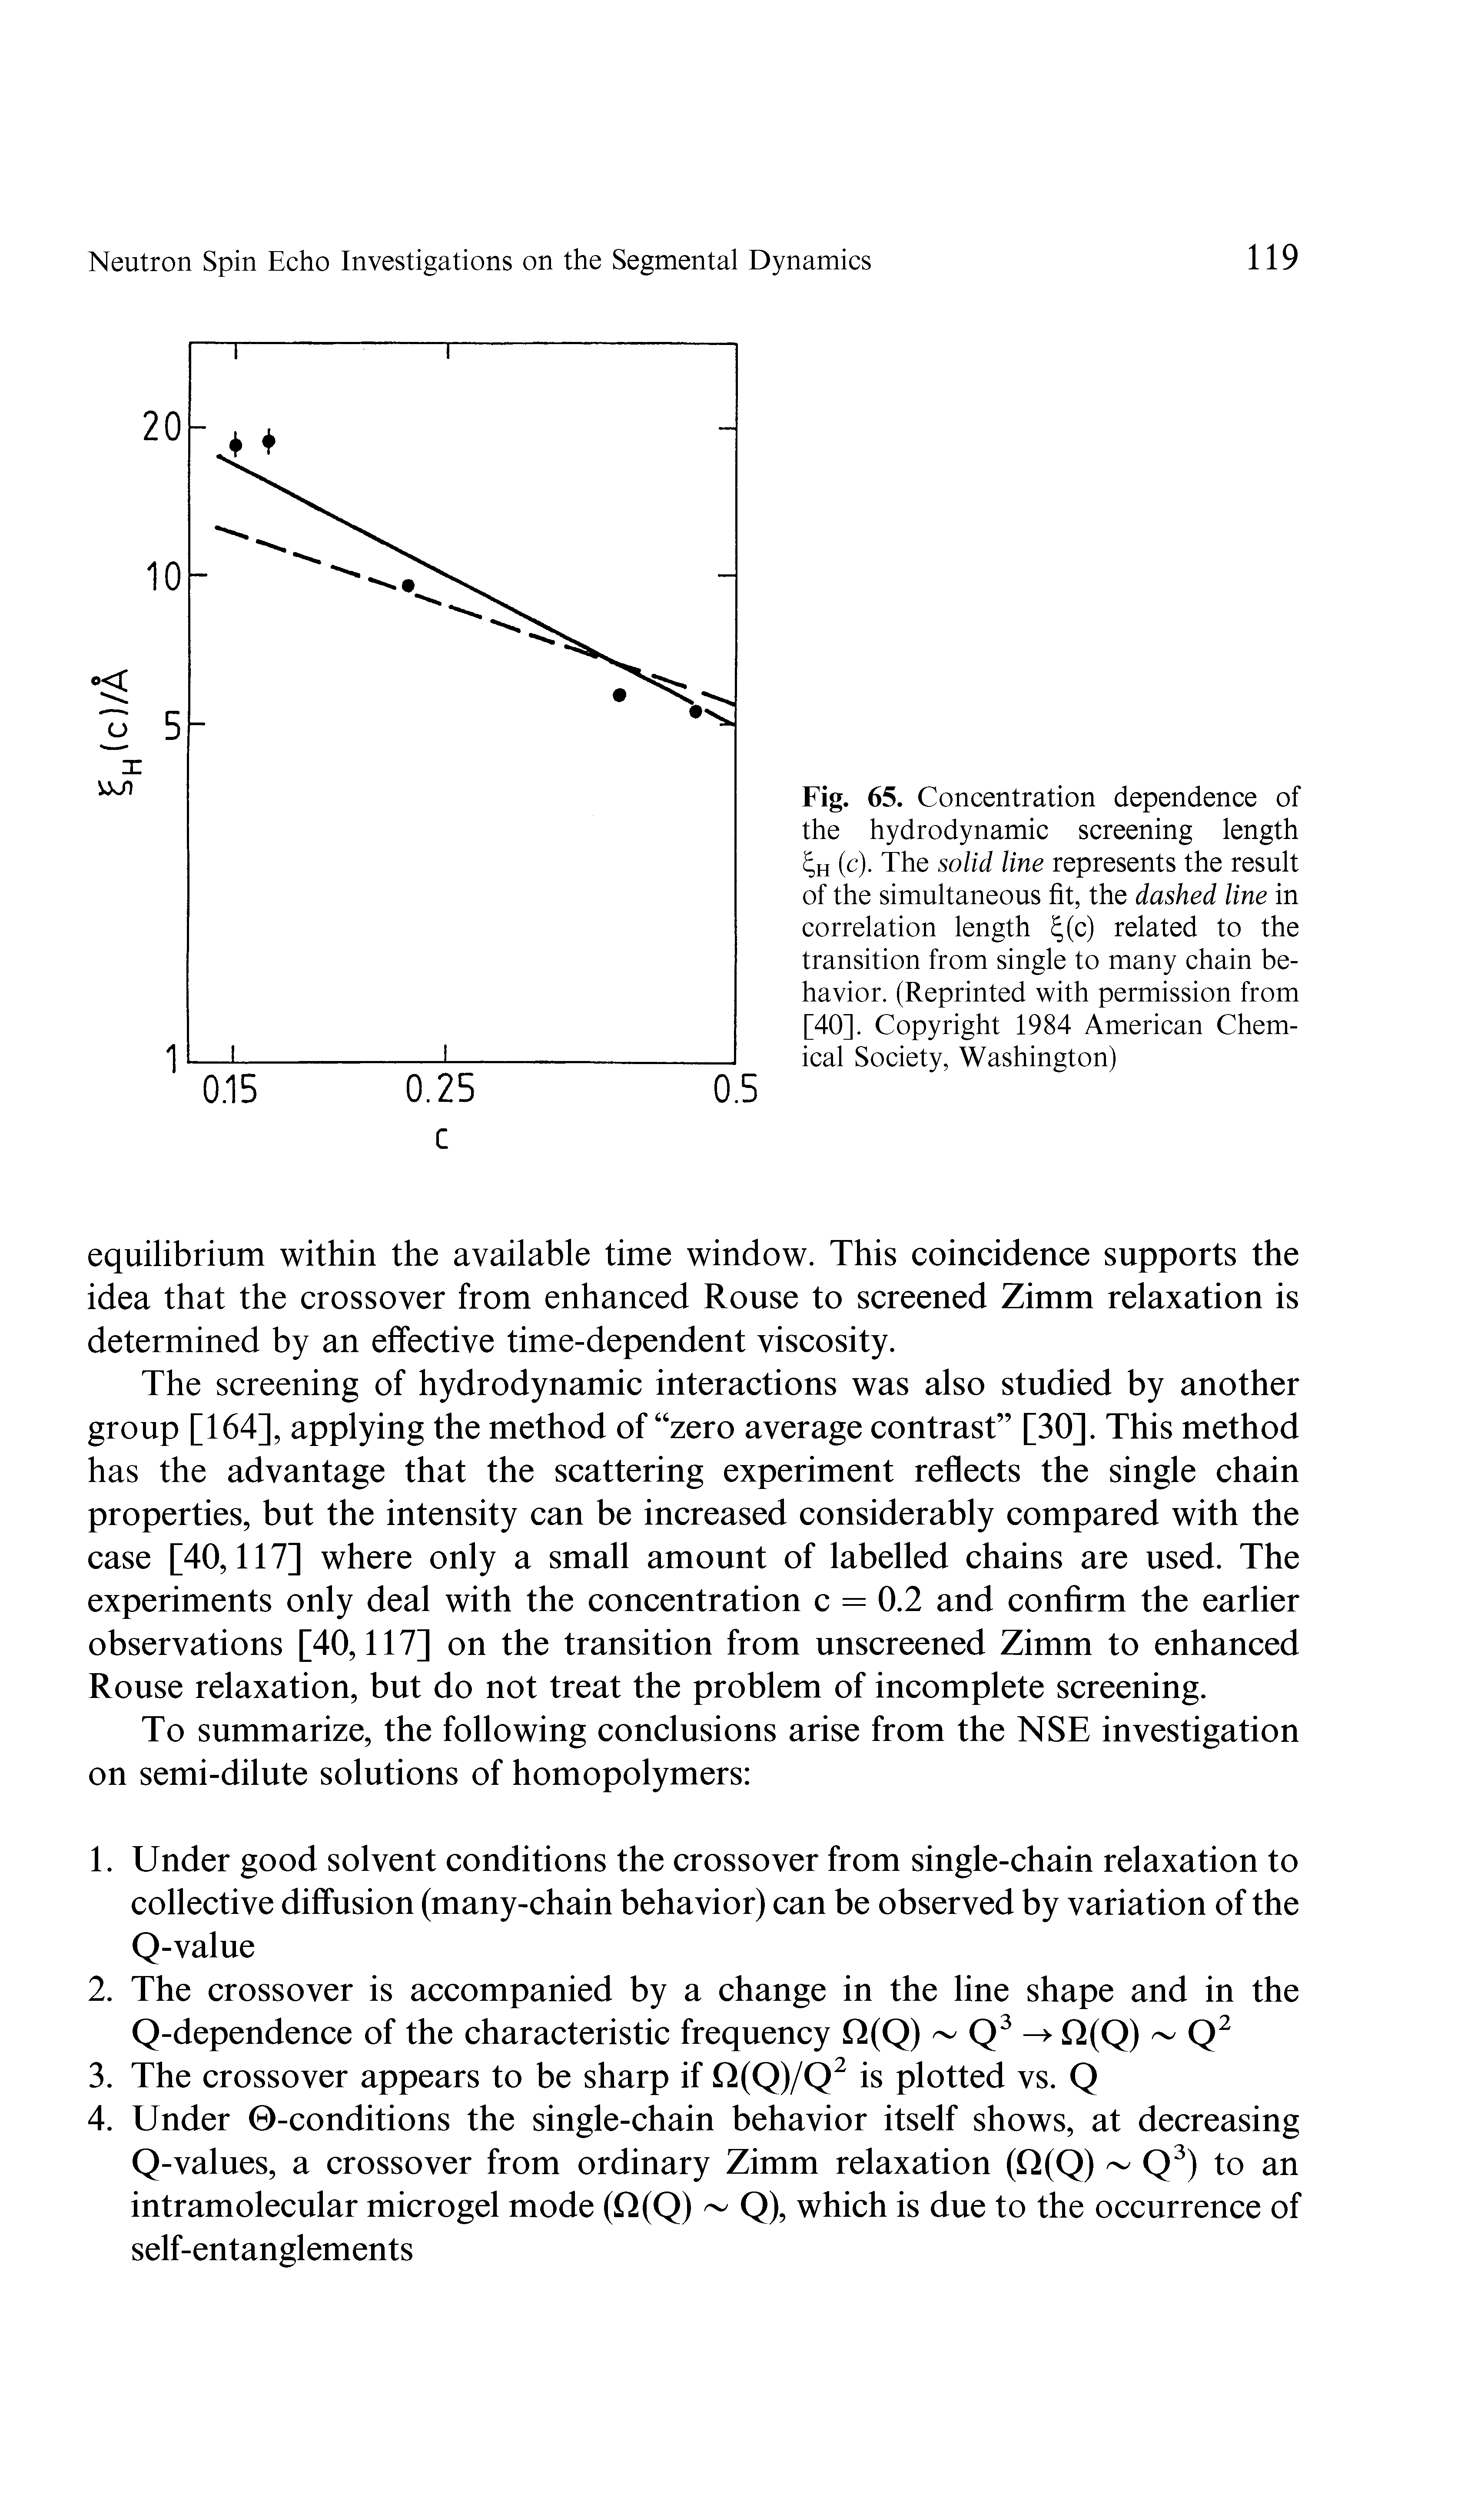 Fig. 65. Concentration dependence of the hydrodynamic screening length (c). The solid line represents the result of the simultaneous fit, the dashed line in correlation length (c) related to the transition from single to many chain behavior. (Reprinted with permission from [40]. Copyright 1984 American Chemical Society, Washington)...